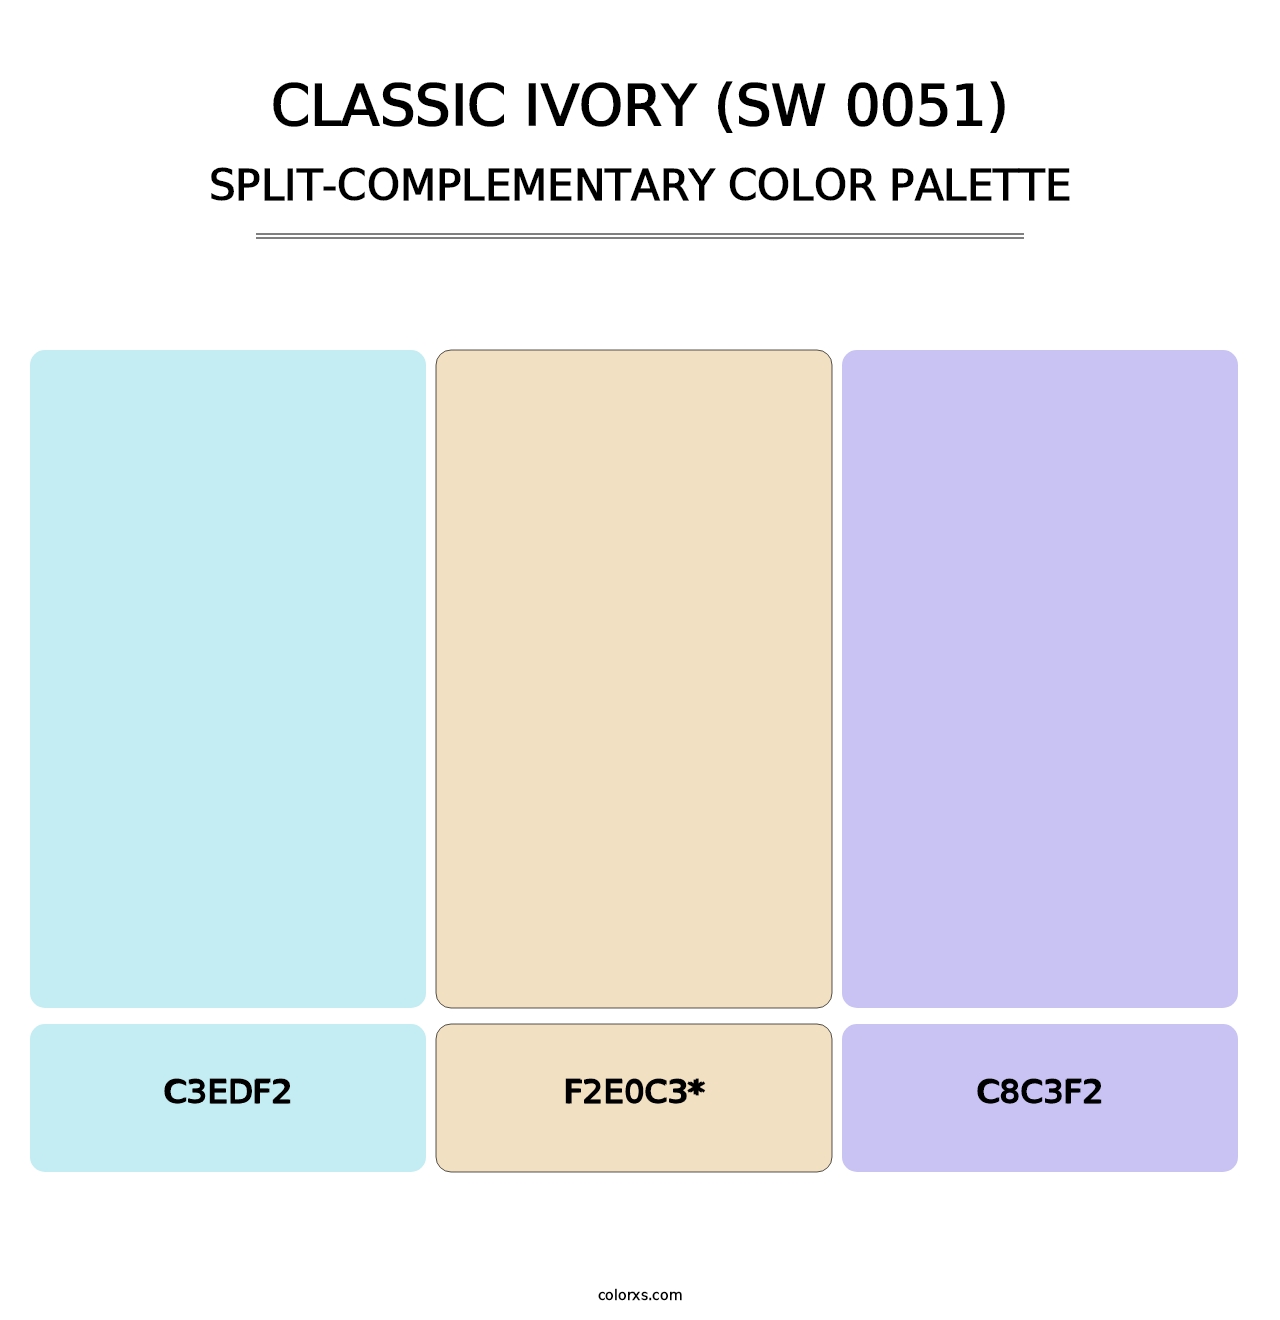 Classic Ivory (SW 0051) - Split-Complementary Color Palette